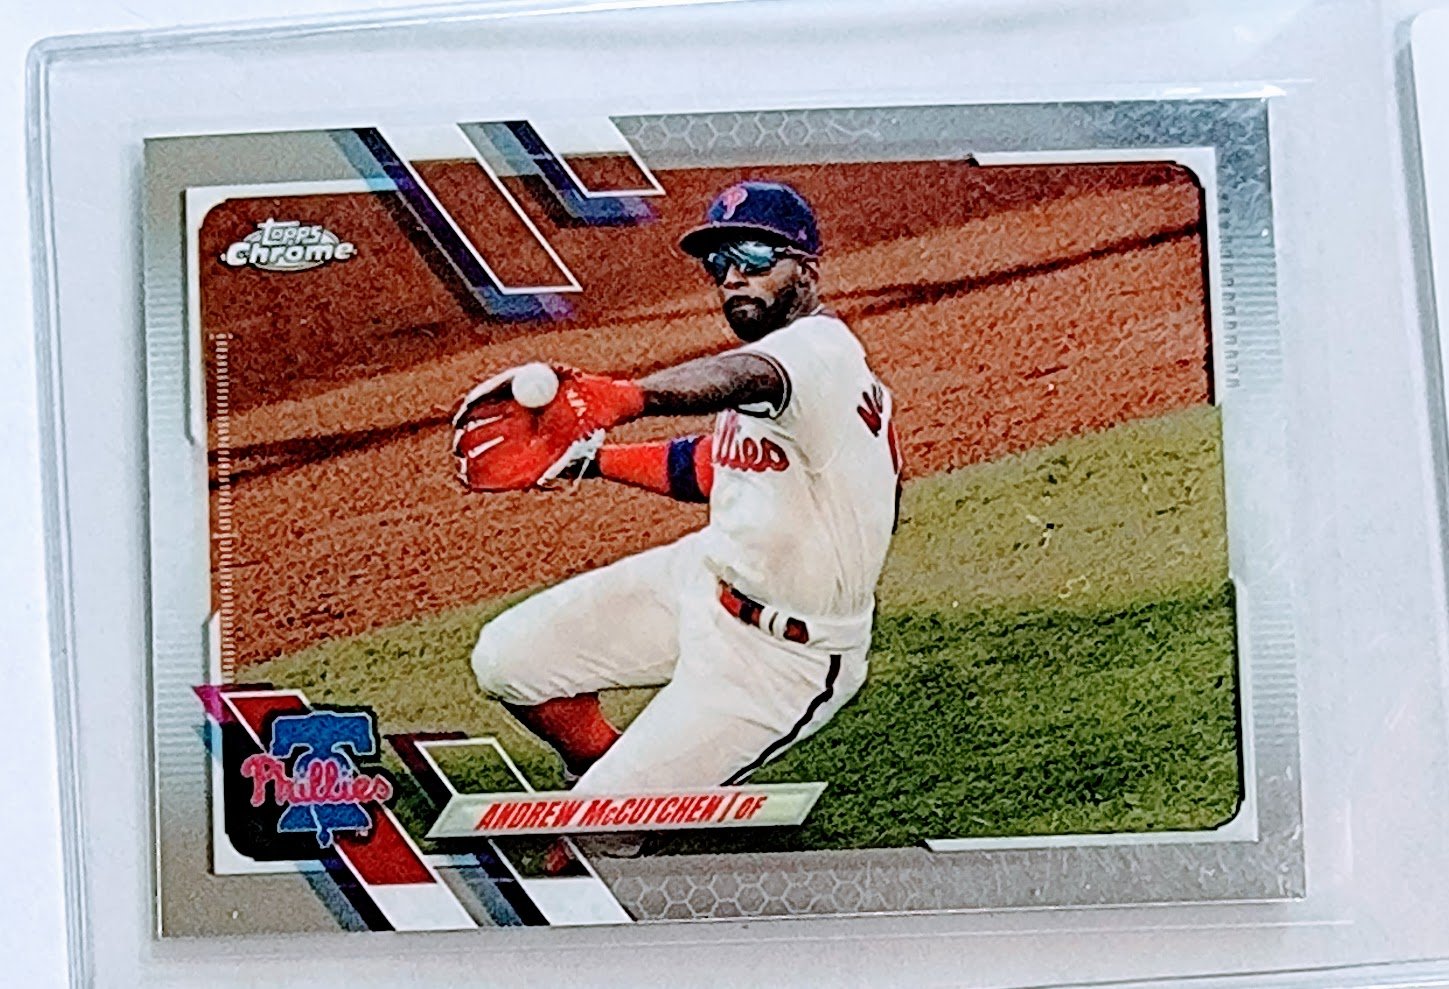 2021 Topps Chrome Andrew McCutchen Baseball Trading Card TPTV simple Xclusive Collectibles   